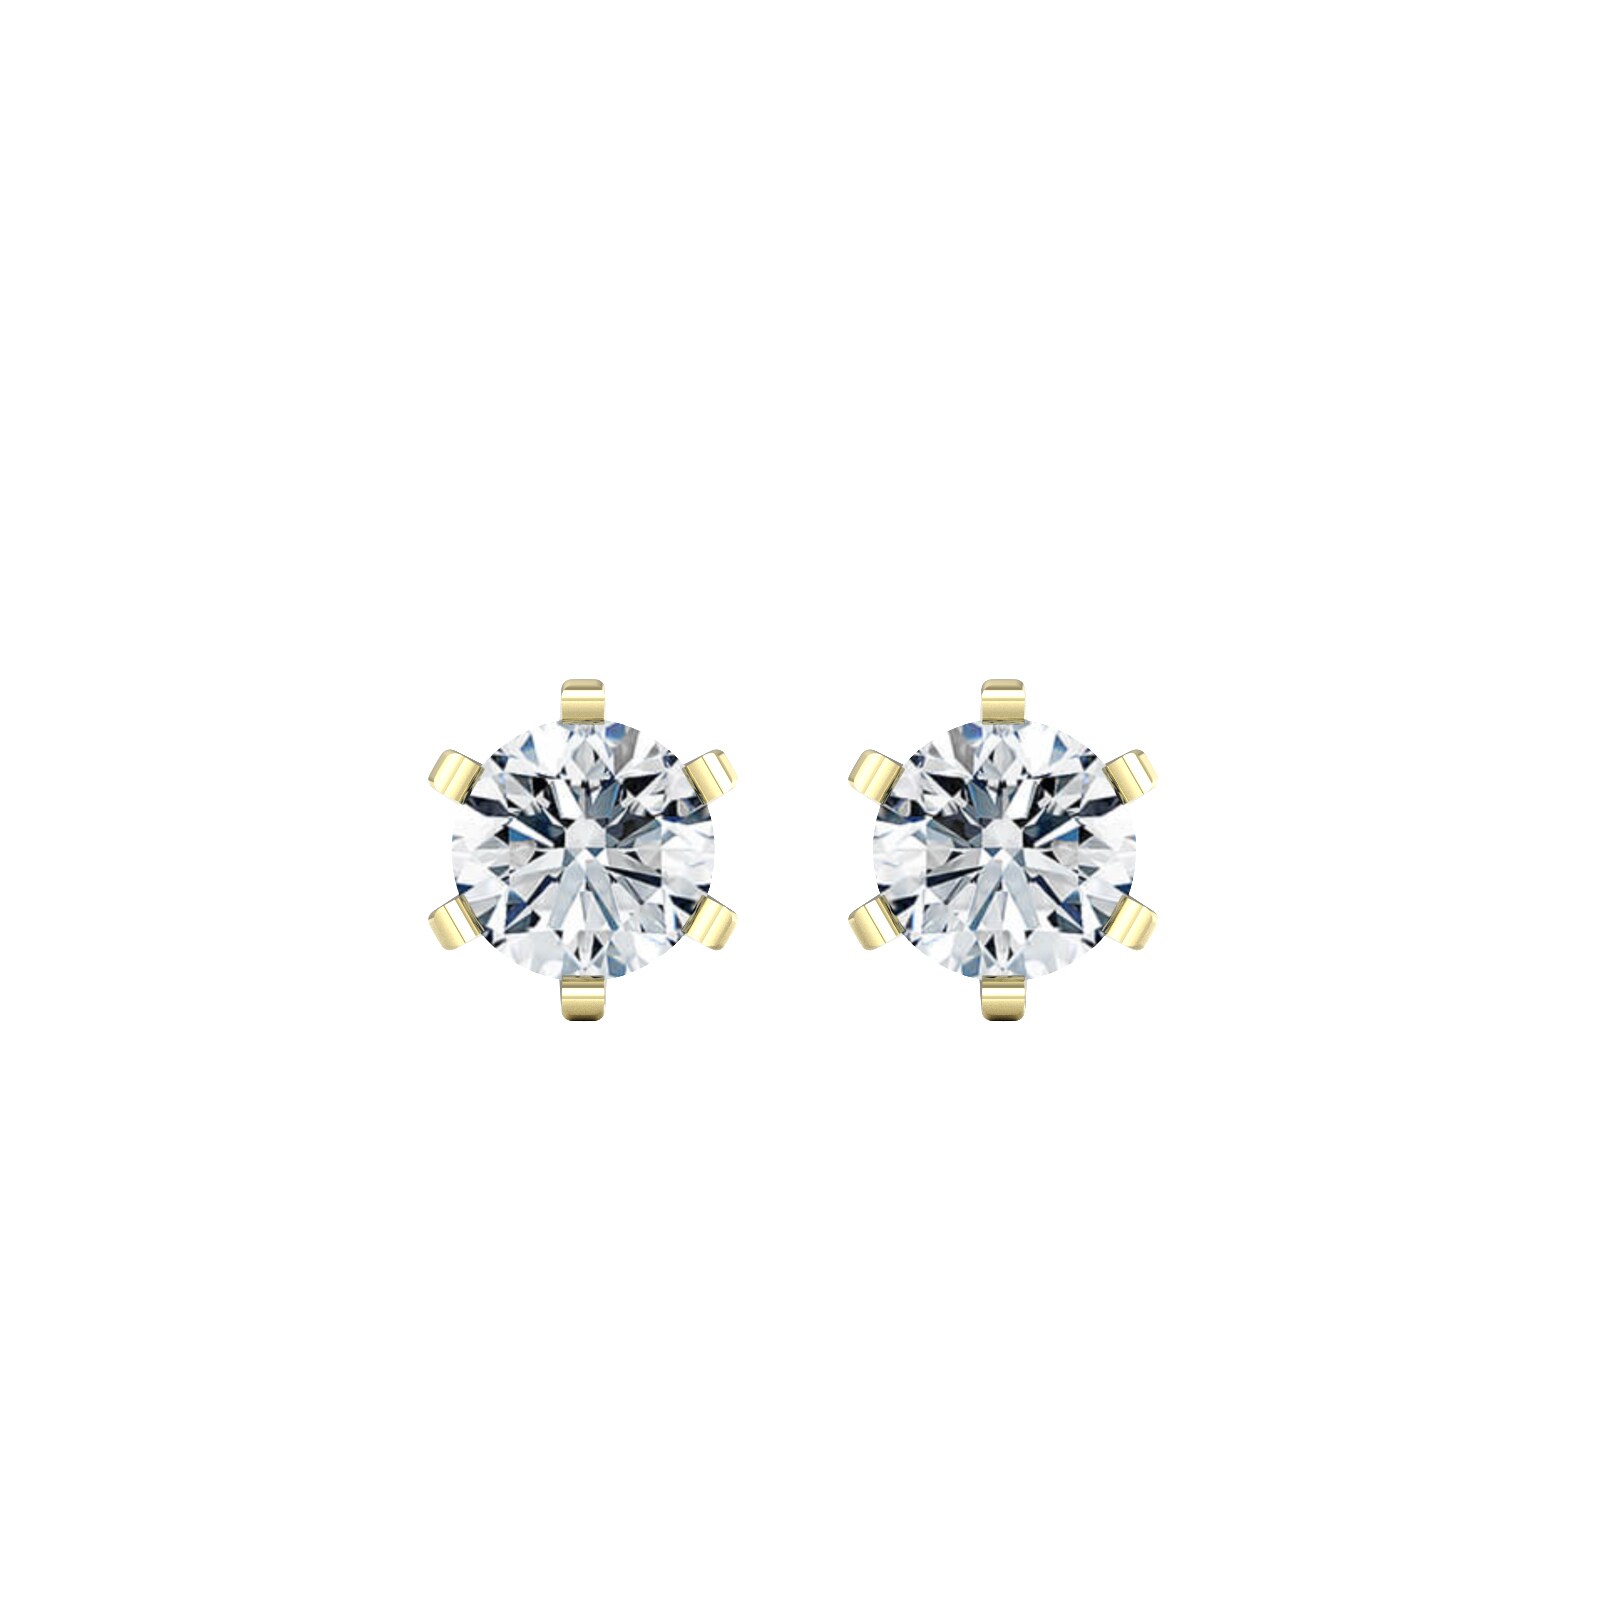 9ct Yellow Gold 0.40cttw Solitaire Diamond Stud Earrings